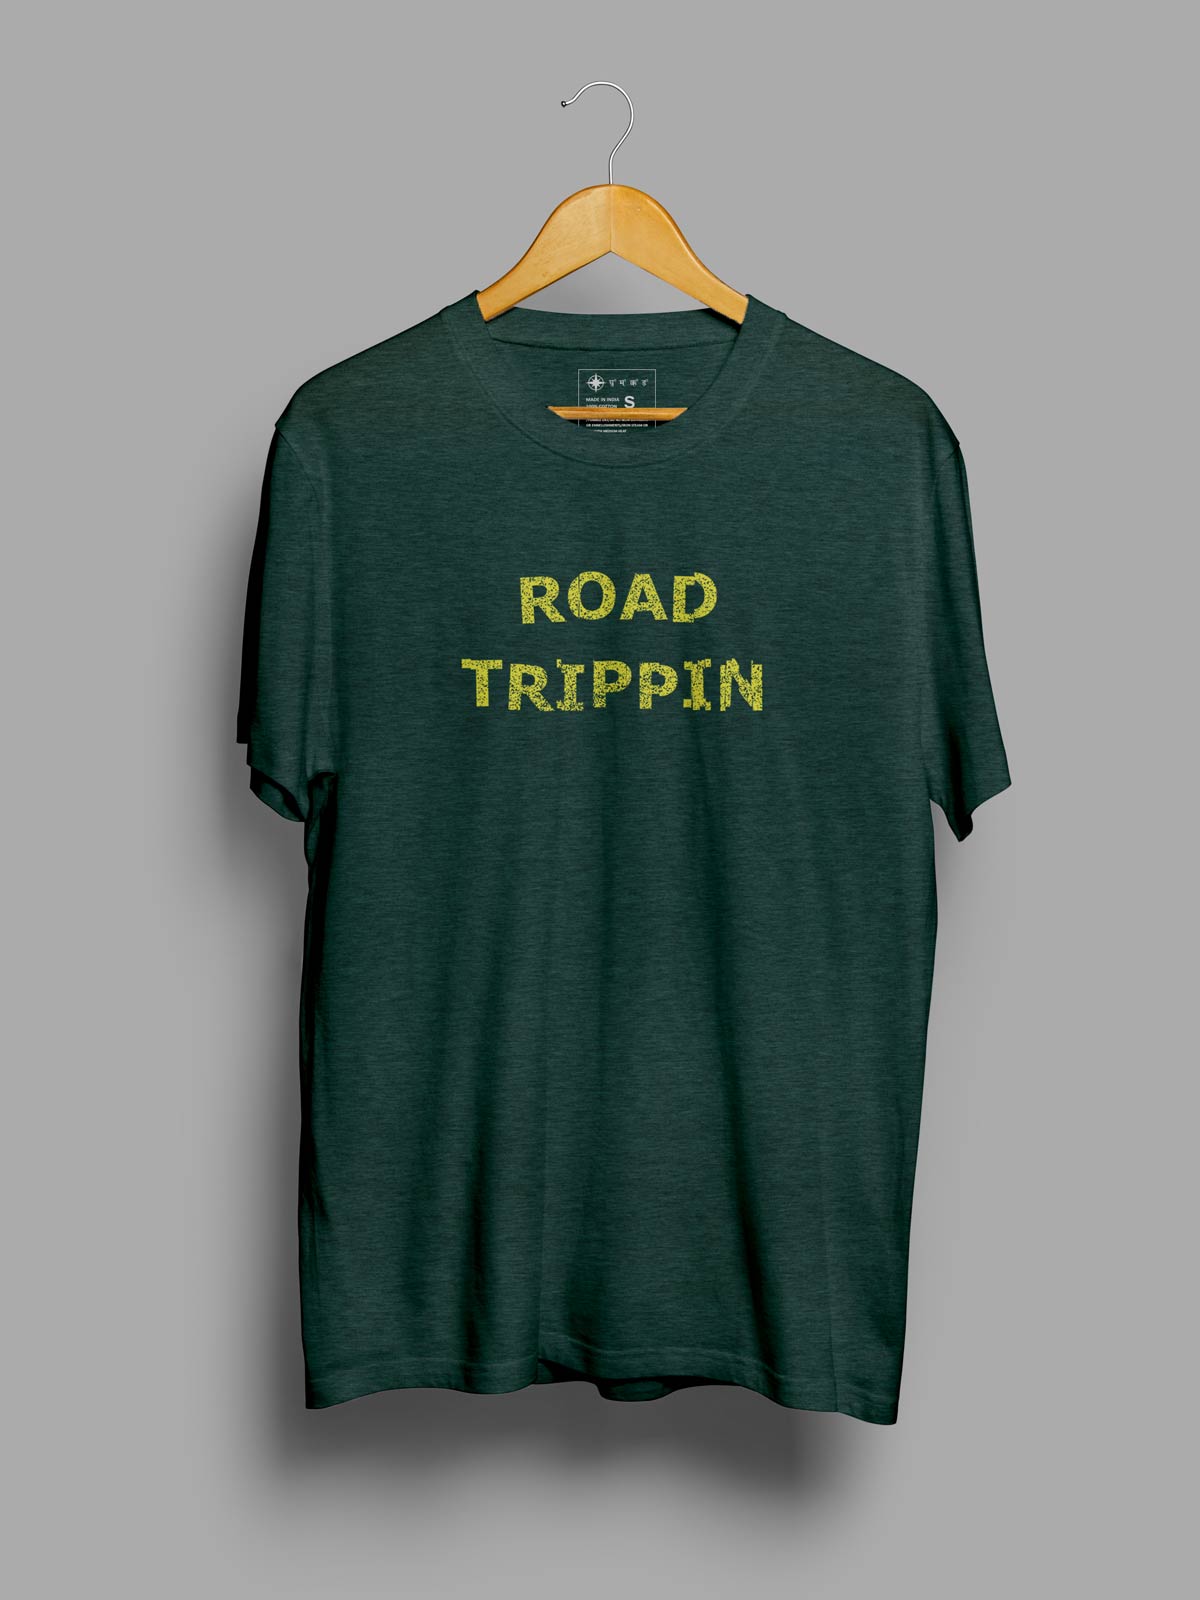 Road-trippin-printed-t-shirt-for-men by Ghumakkad